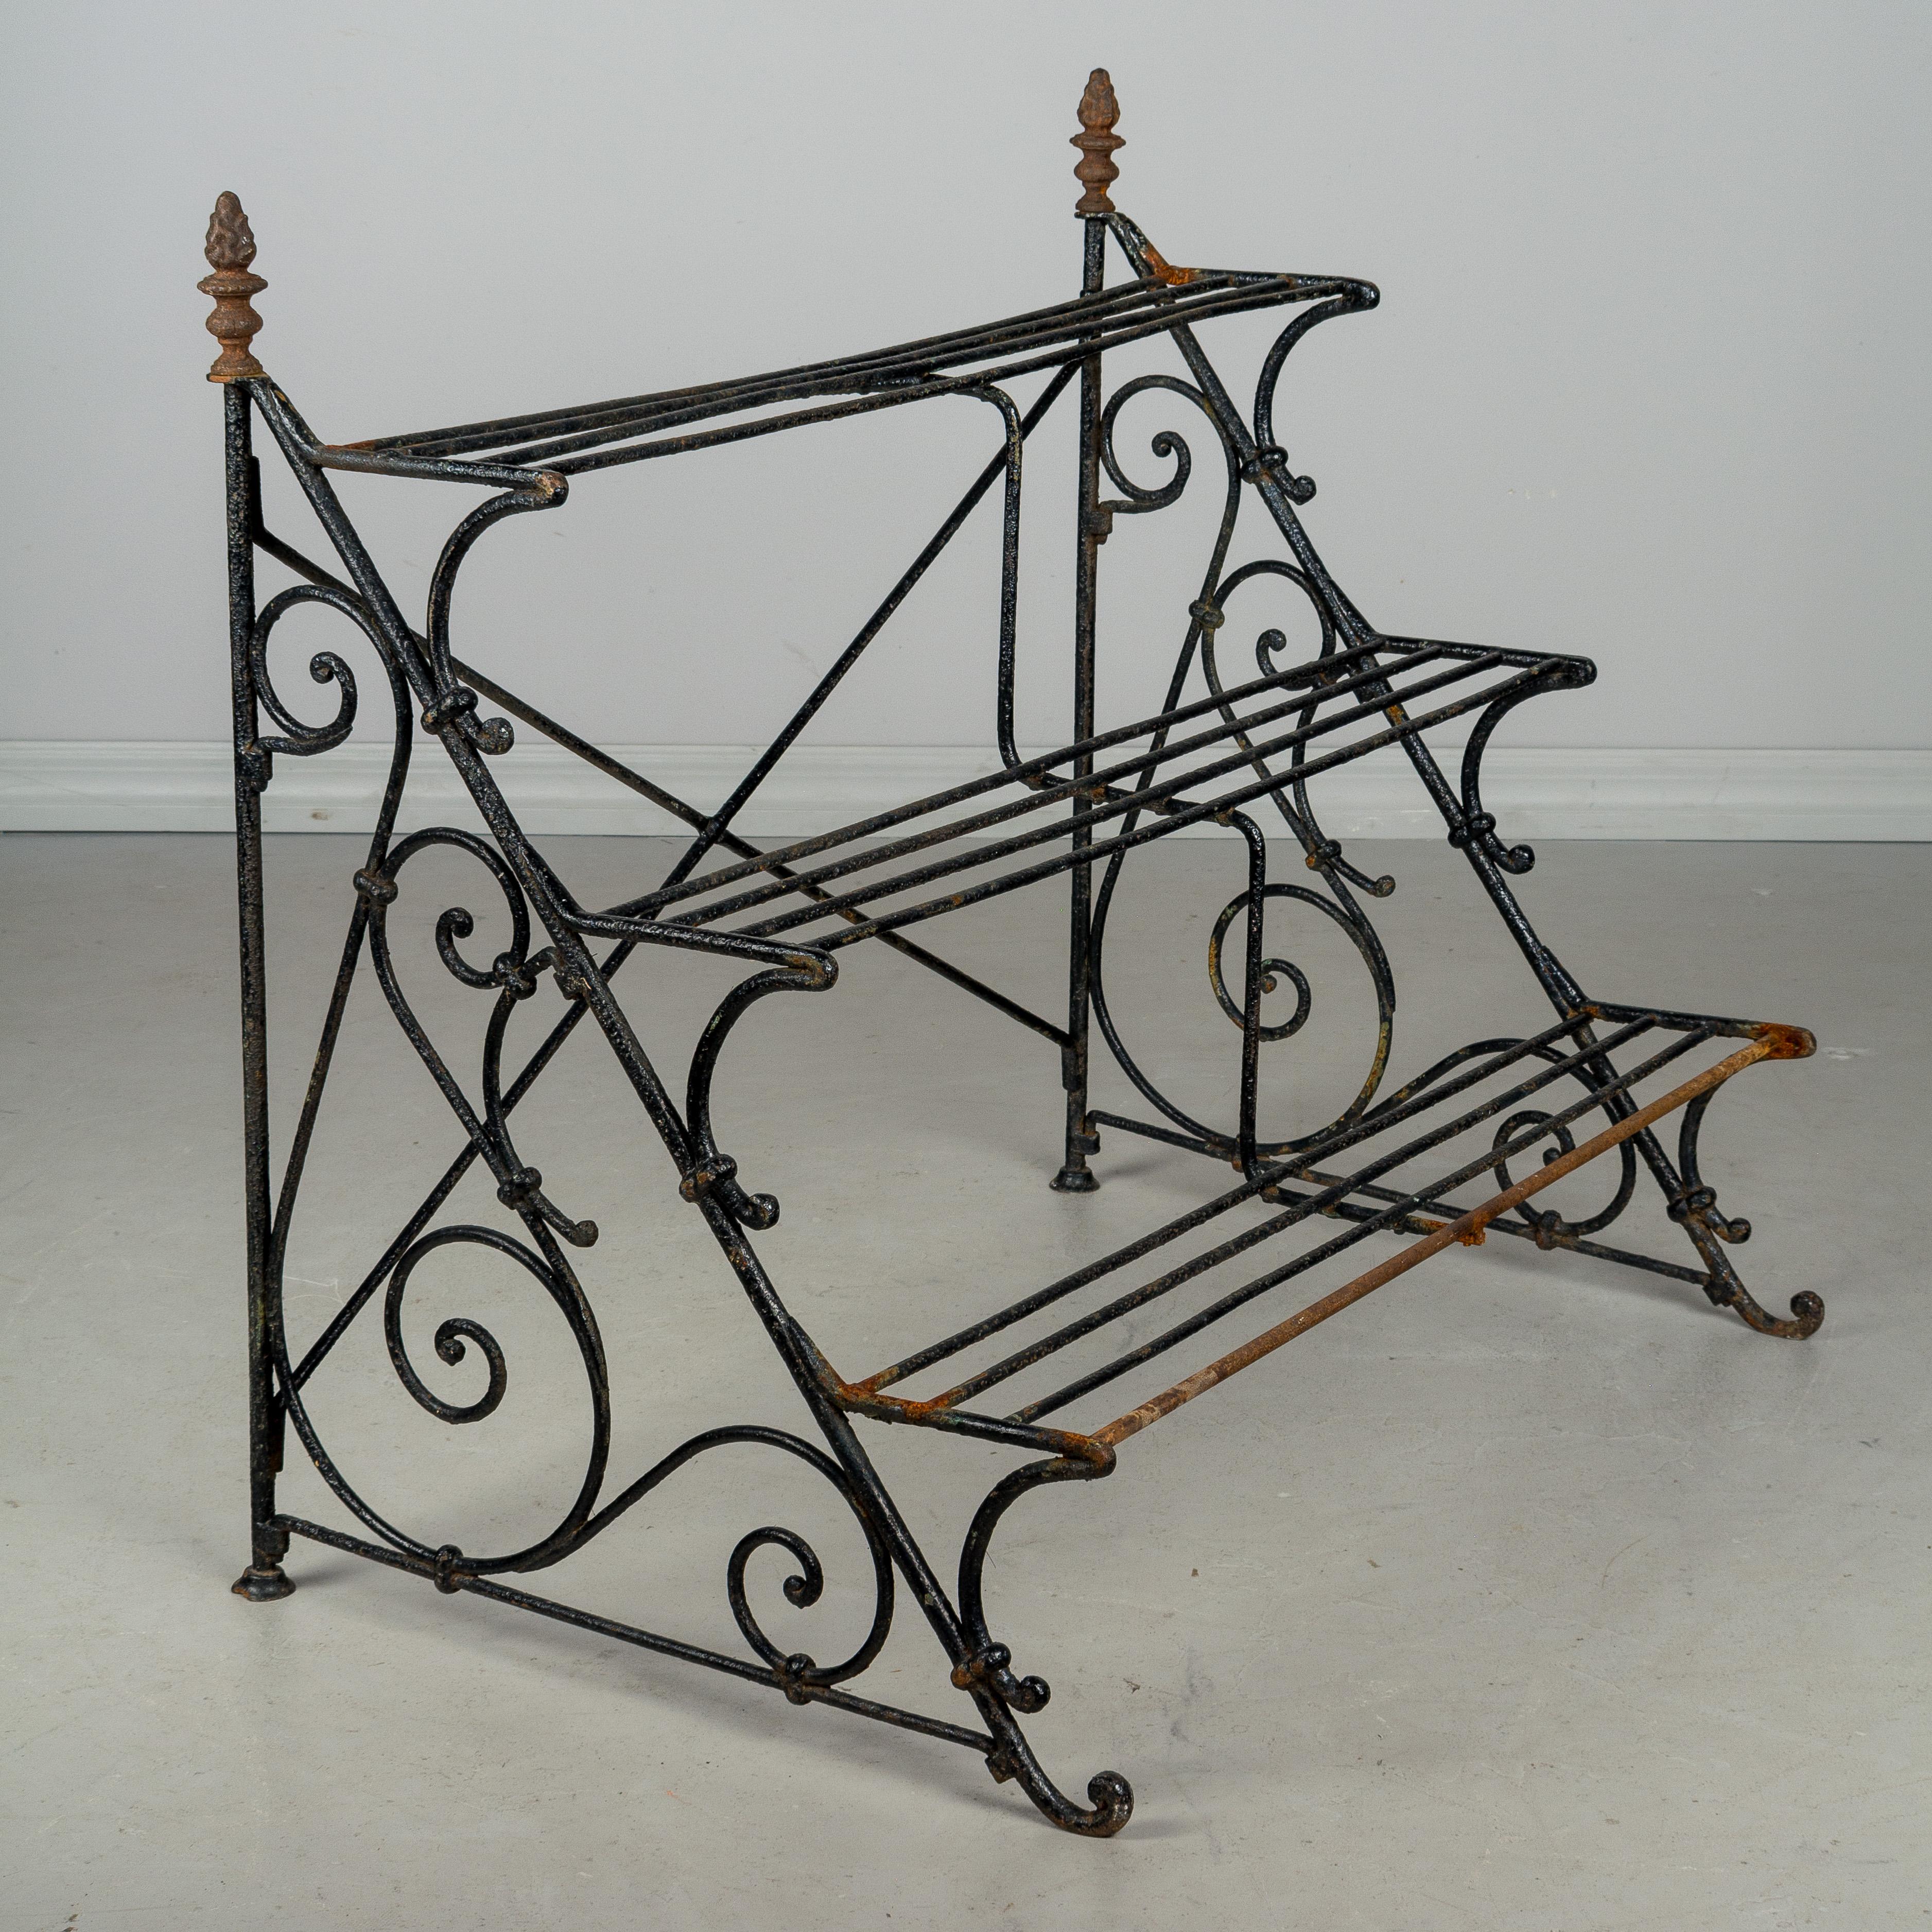 A French wrought iron stepped garden shelf for potted plants. Scroll design on the sides and decorative finials at the top. Old black painted patina is rusted in places especially on the lower step and the finials.